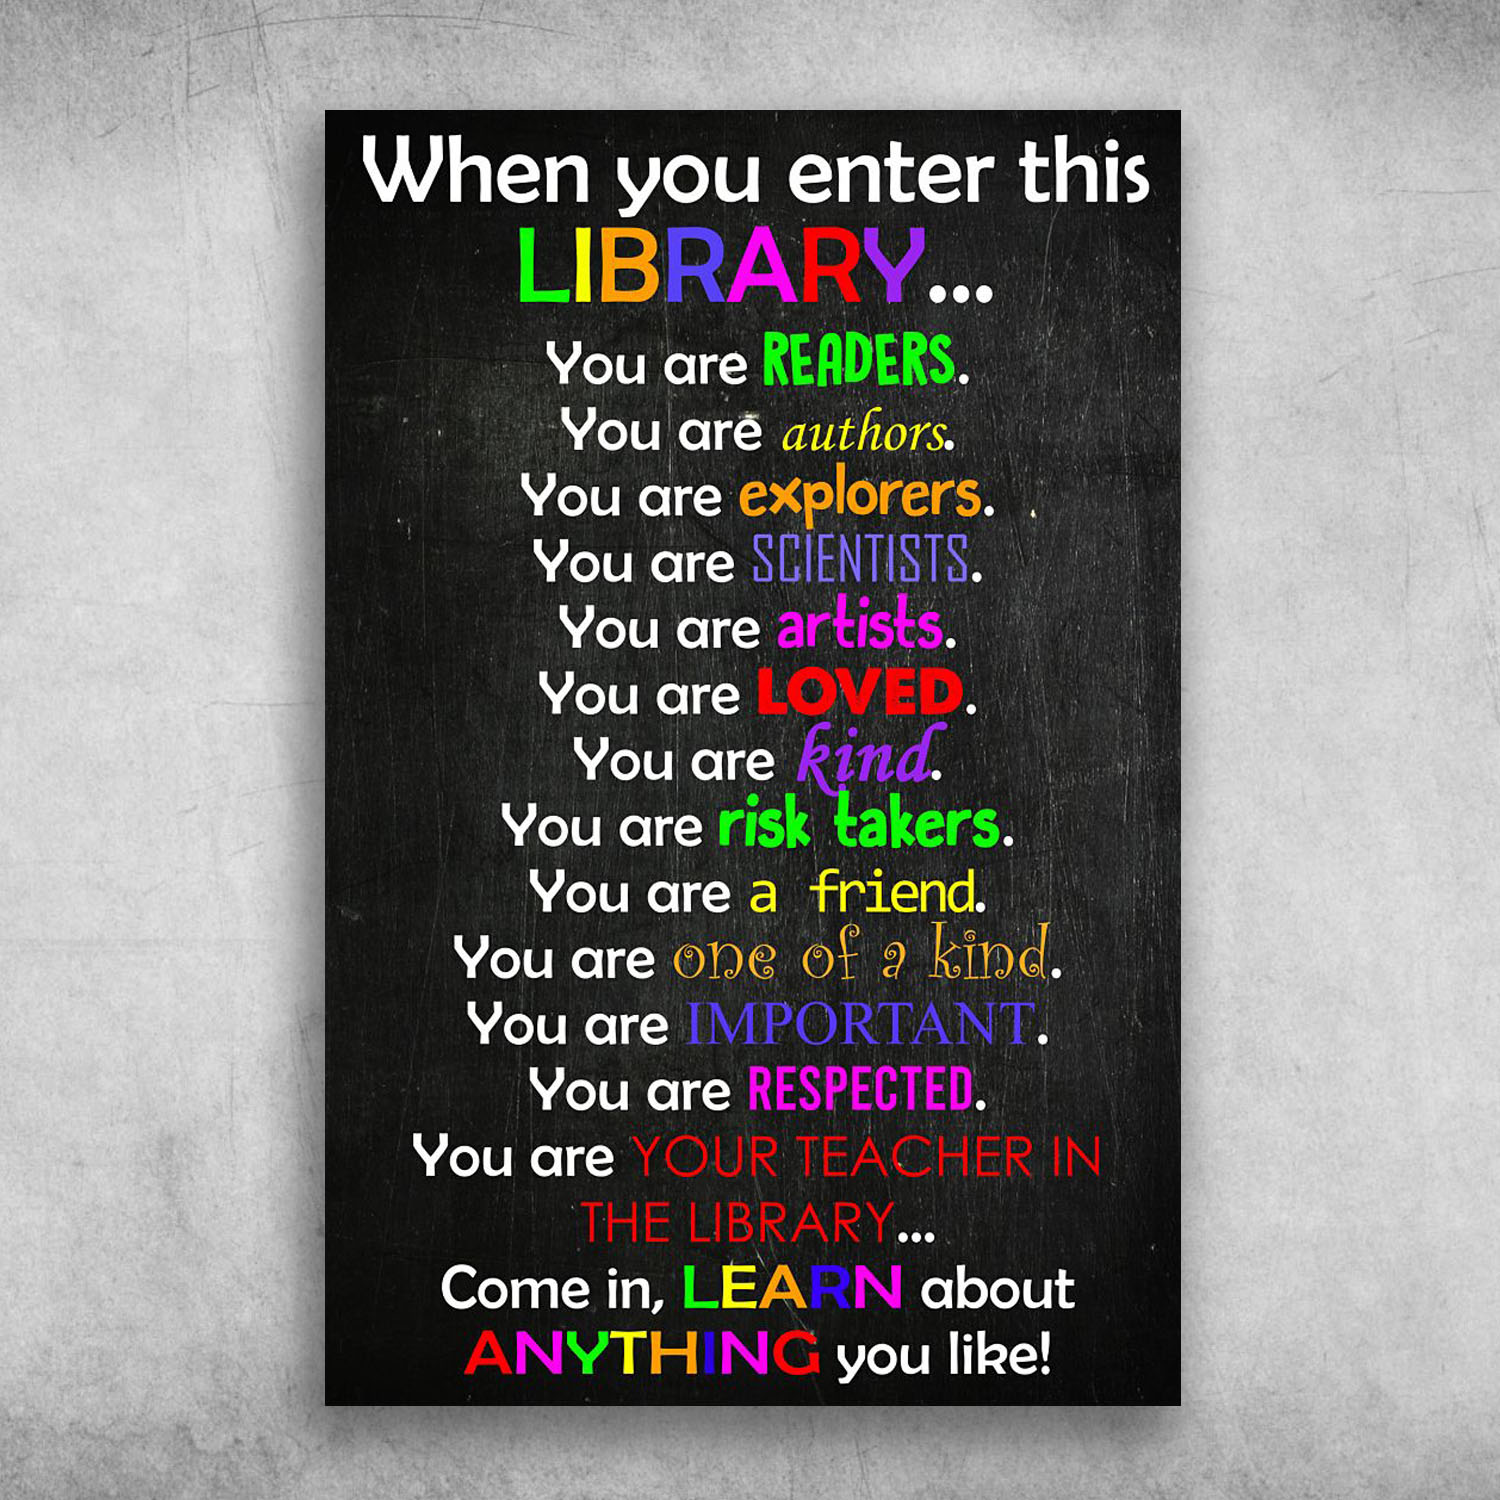 When You Enter This Library You Are Readers, You Are Authors